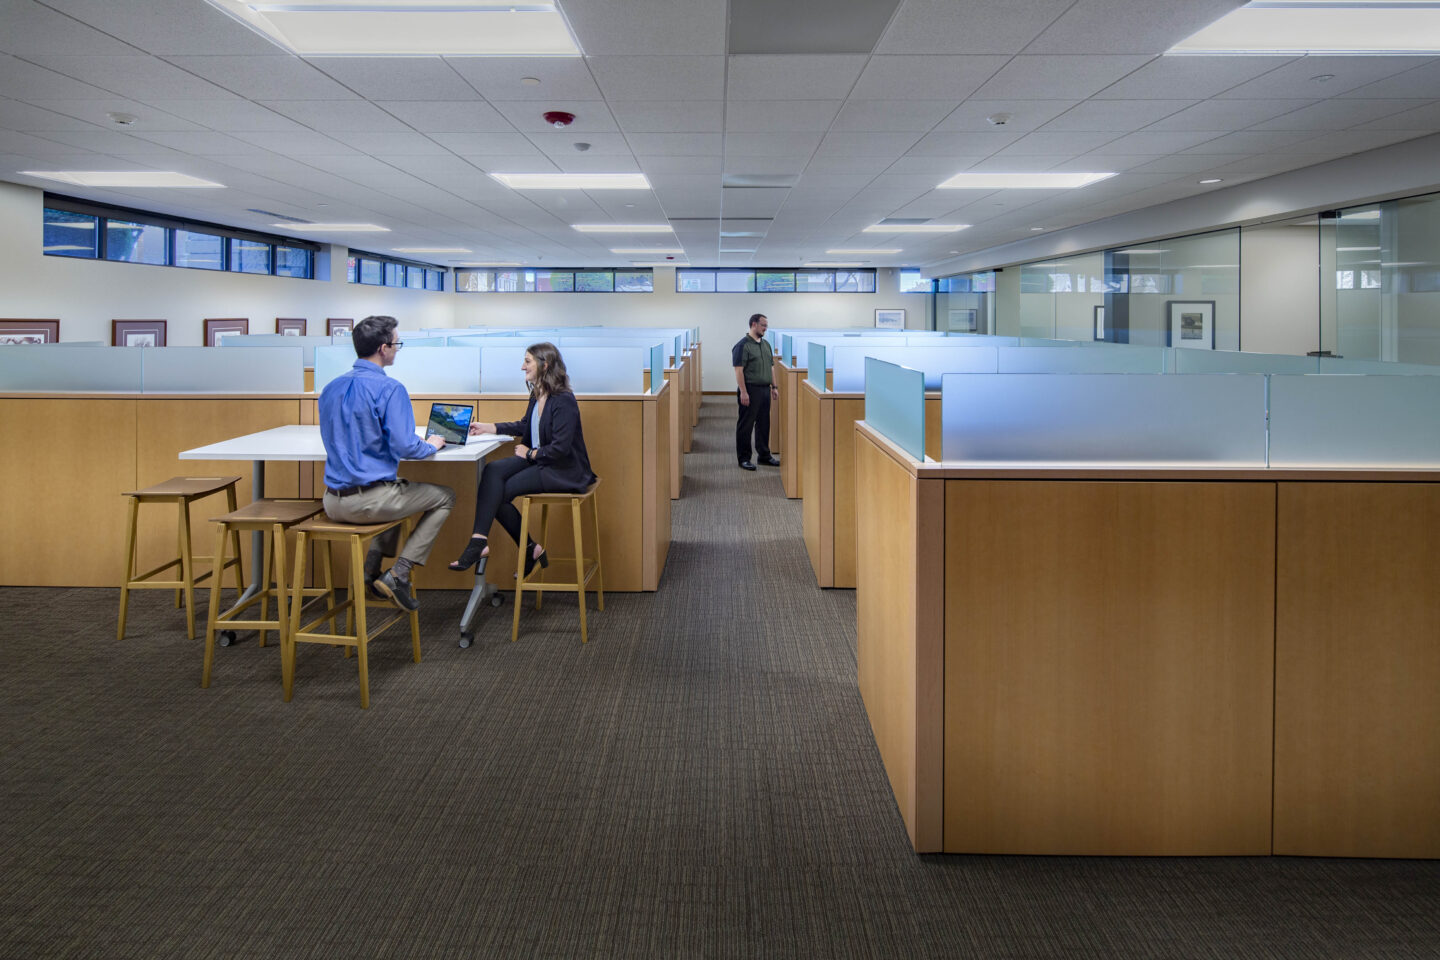 Workstations designed for both privacy and light fill a large office area